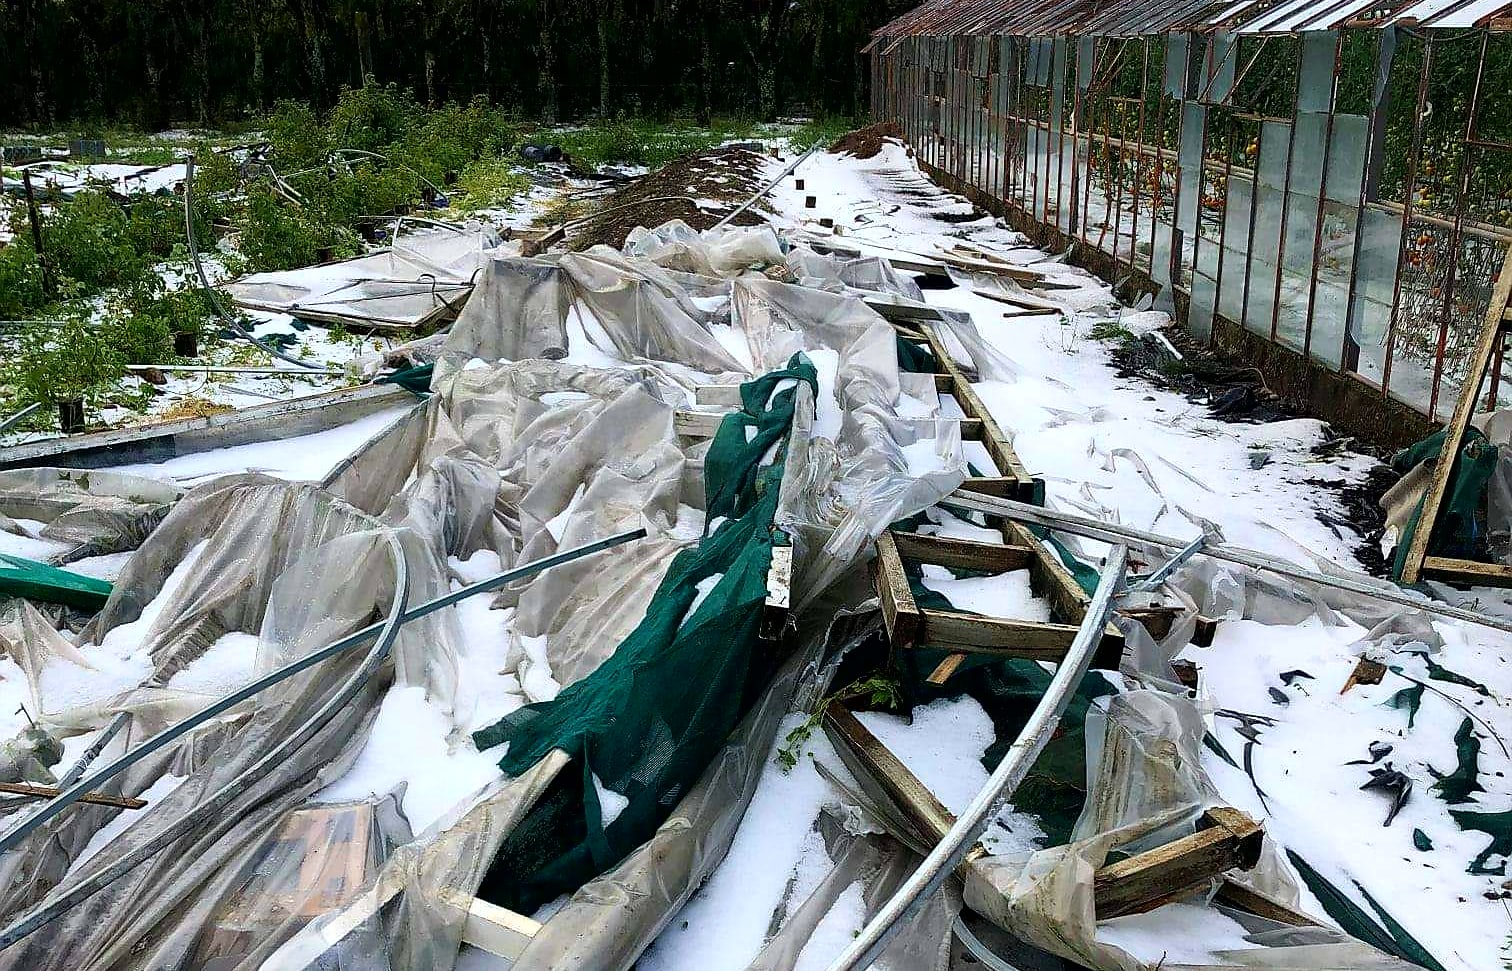 Debris was flung over a glasshouse in Motueka and the neighbour's property as a twister moved through the area, after which hail hit as well.